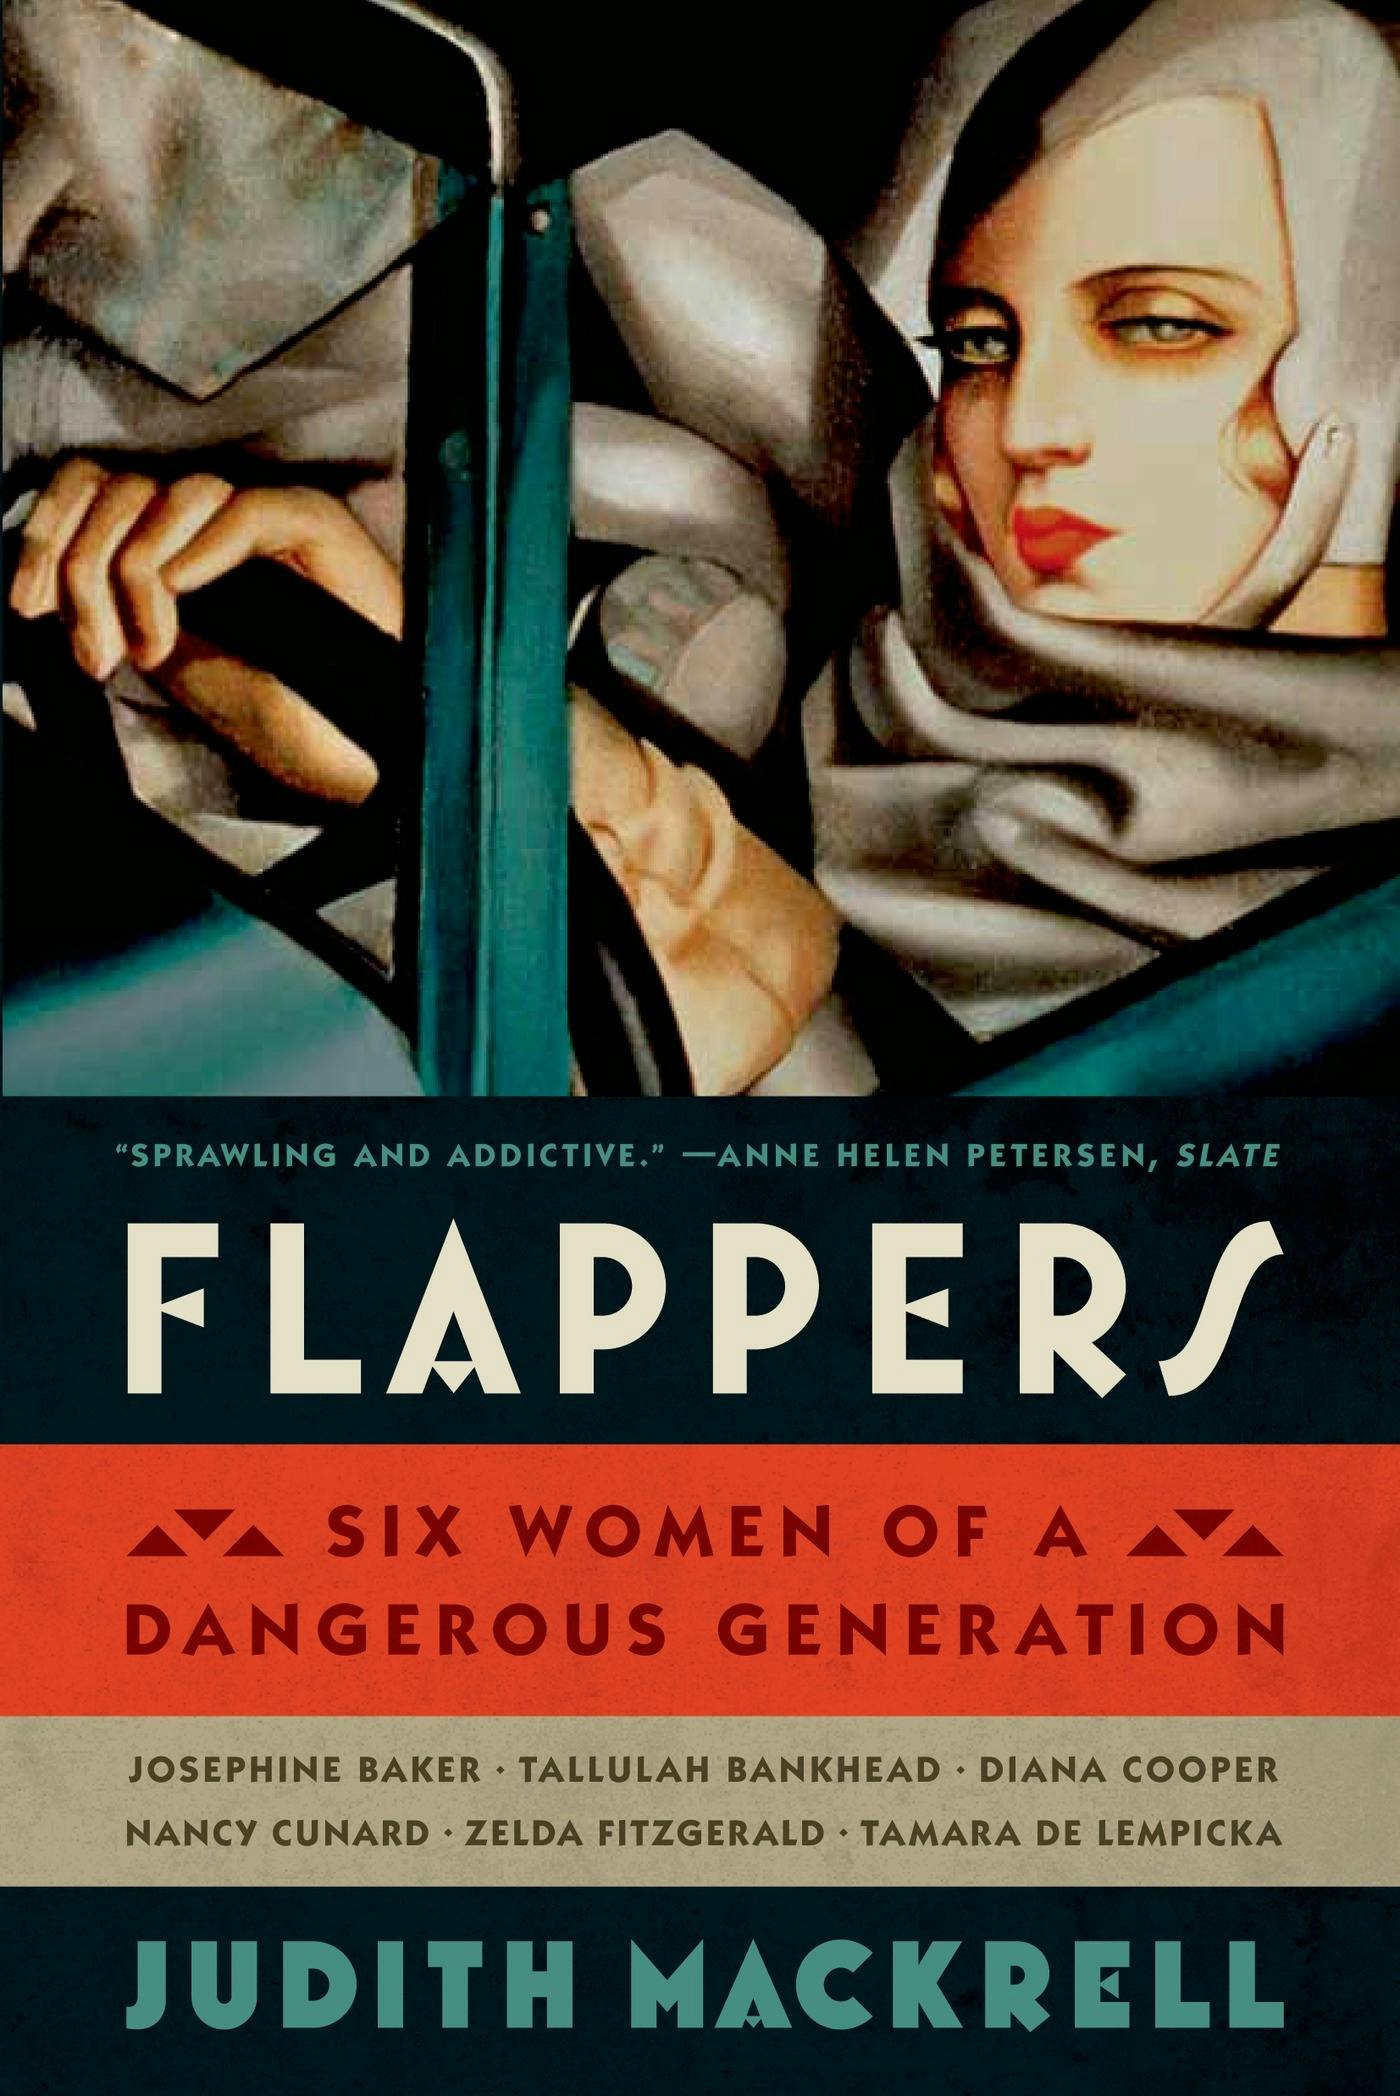 Flappers image